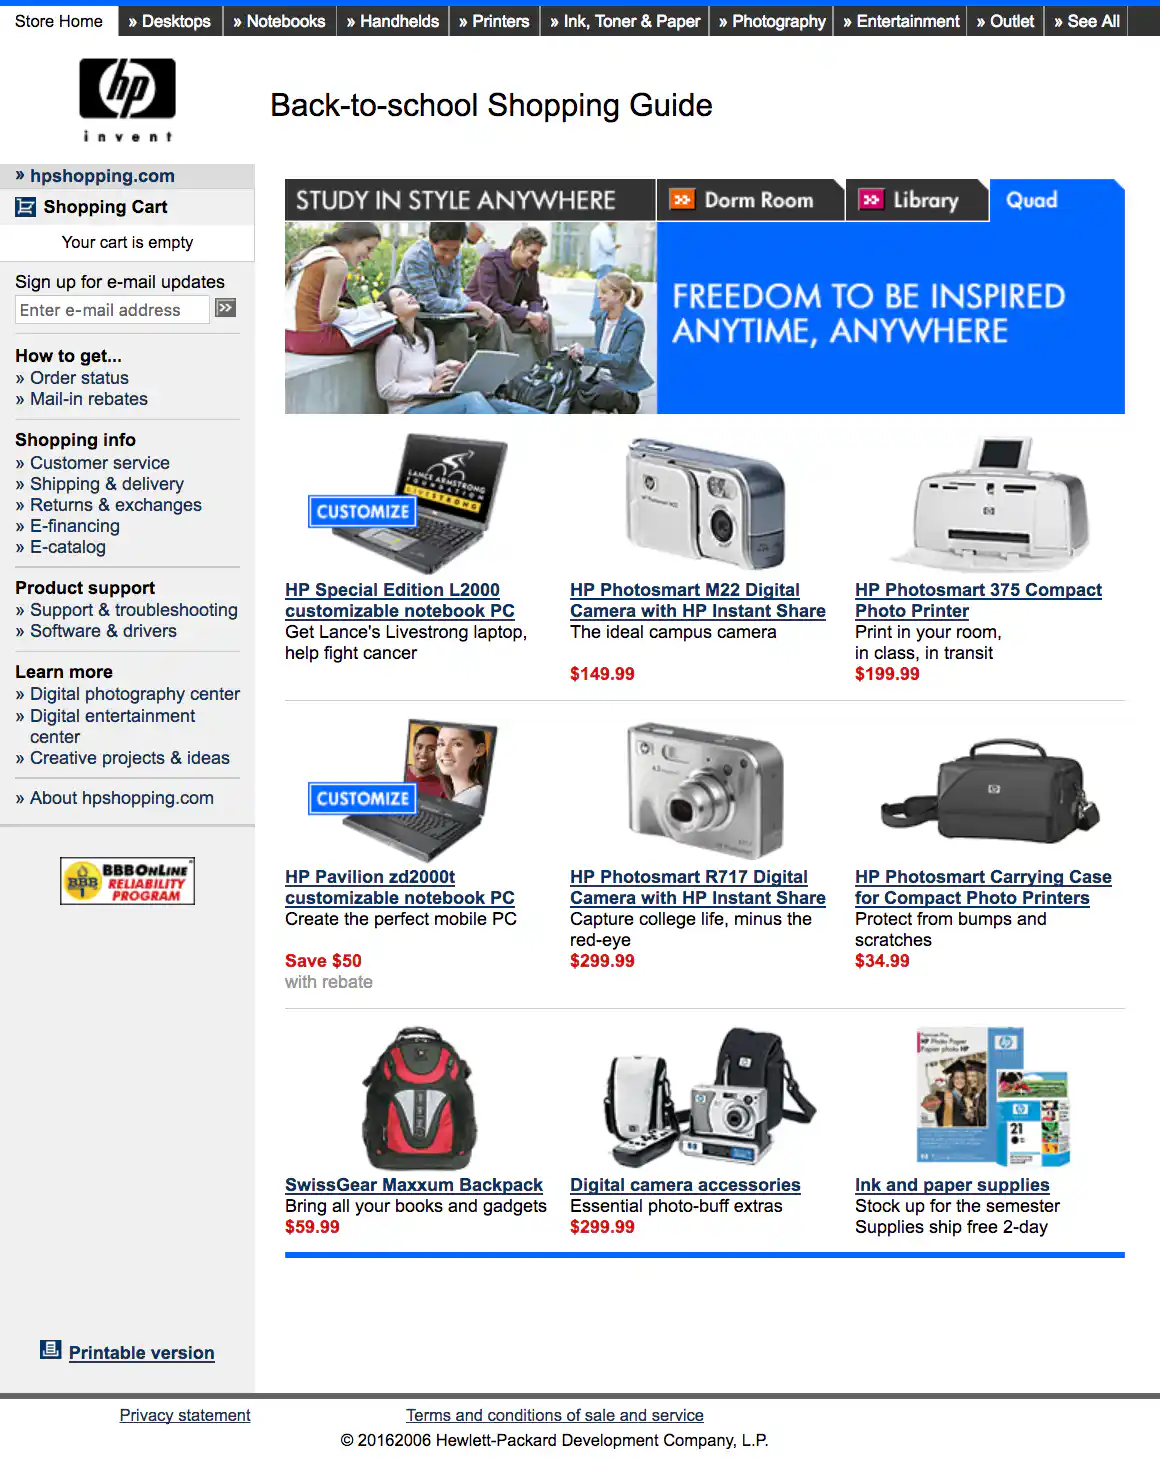 HPShopping.com Back-to-School Shopping Guide - Study Anywhere: Quad